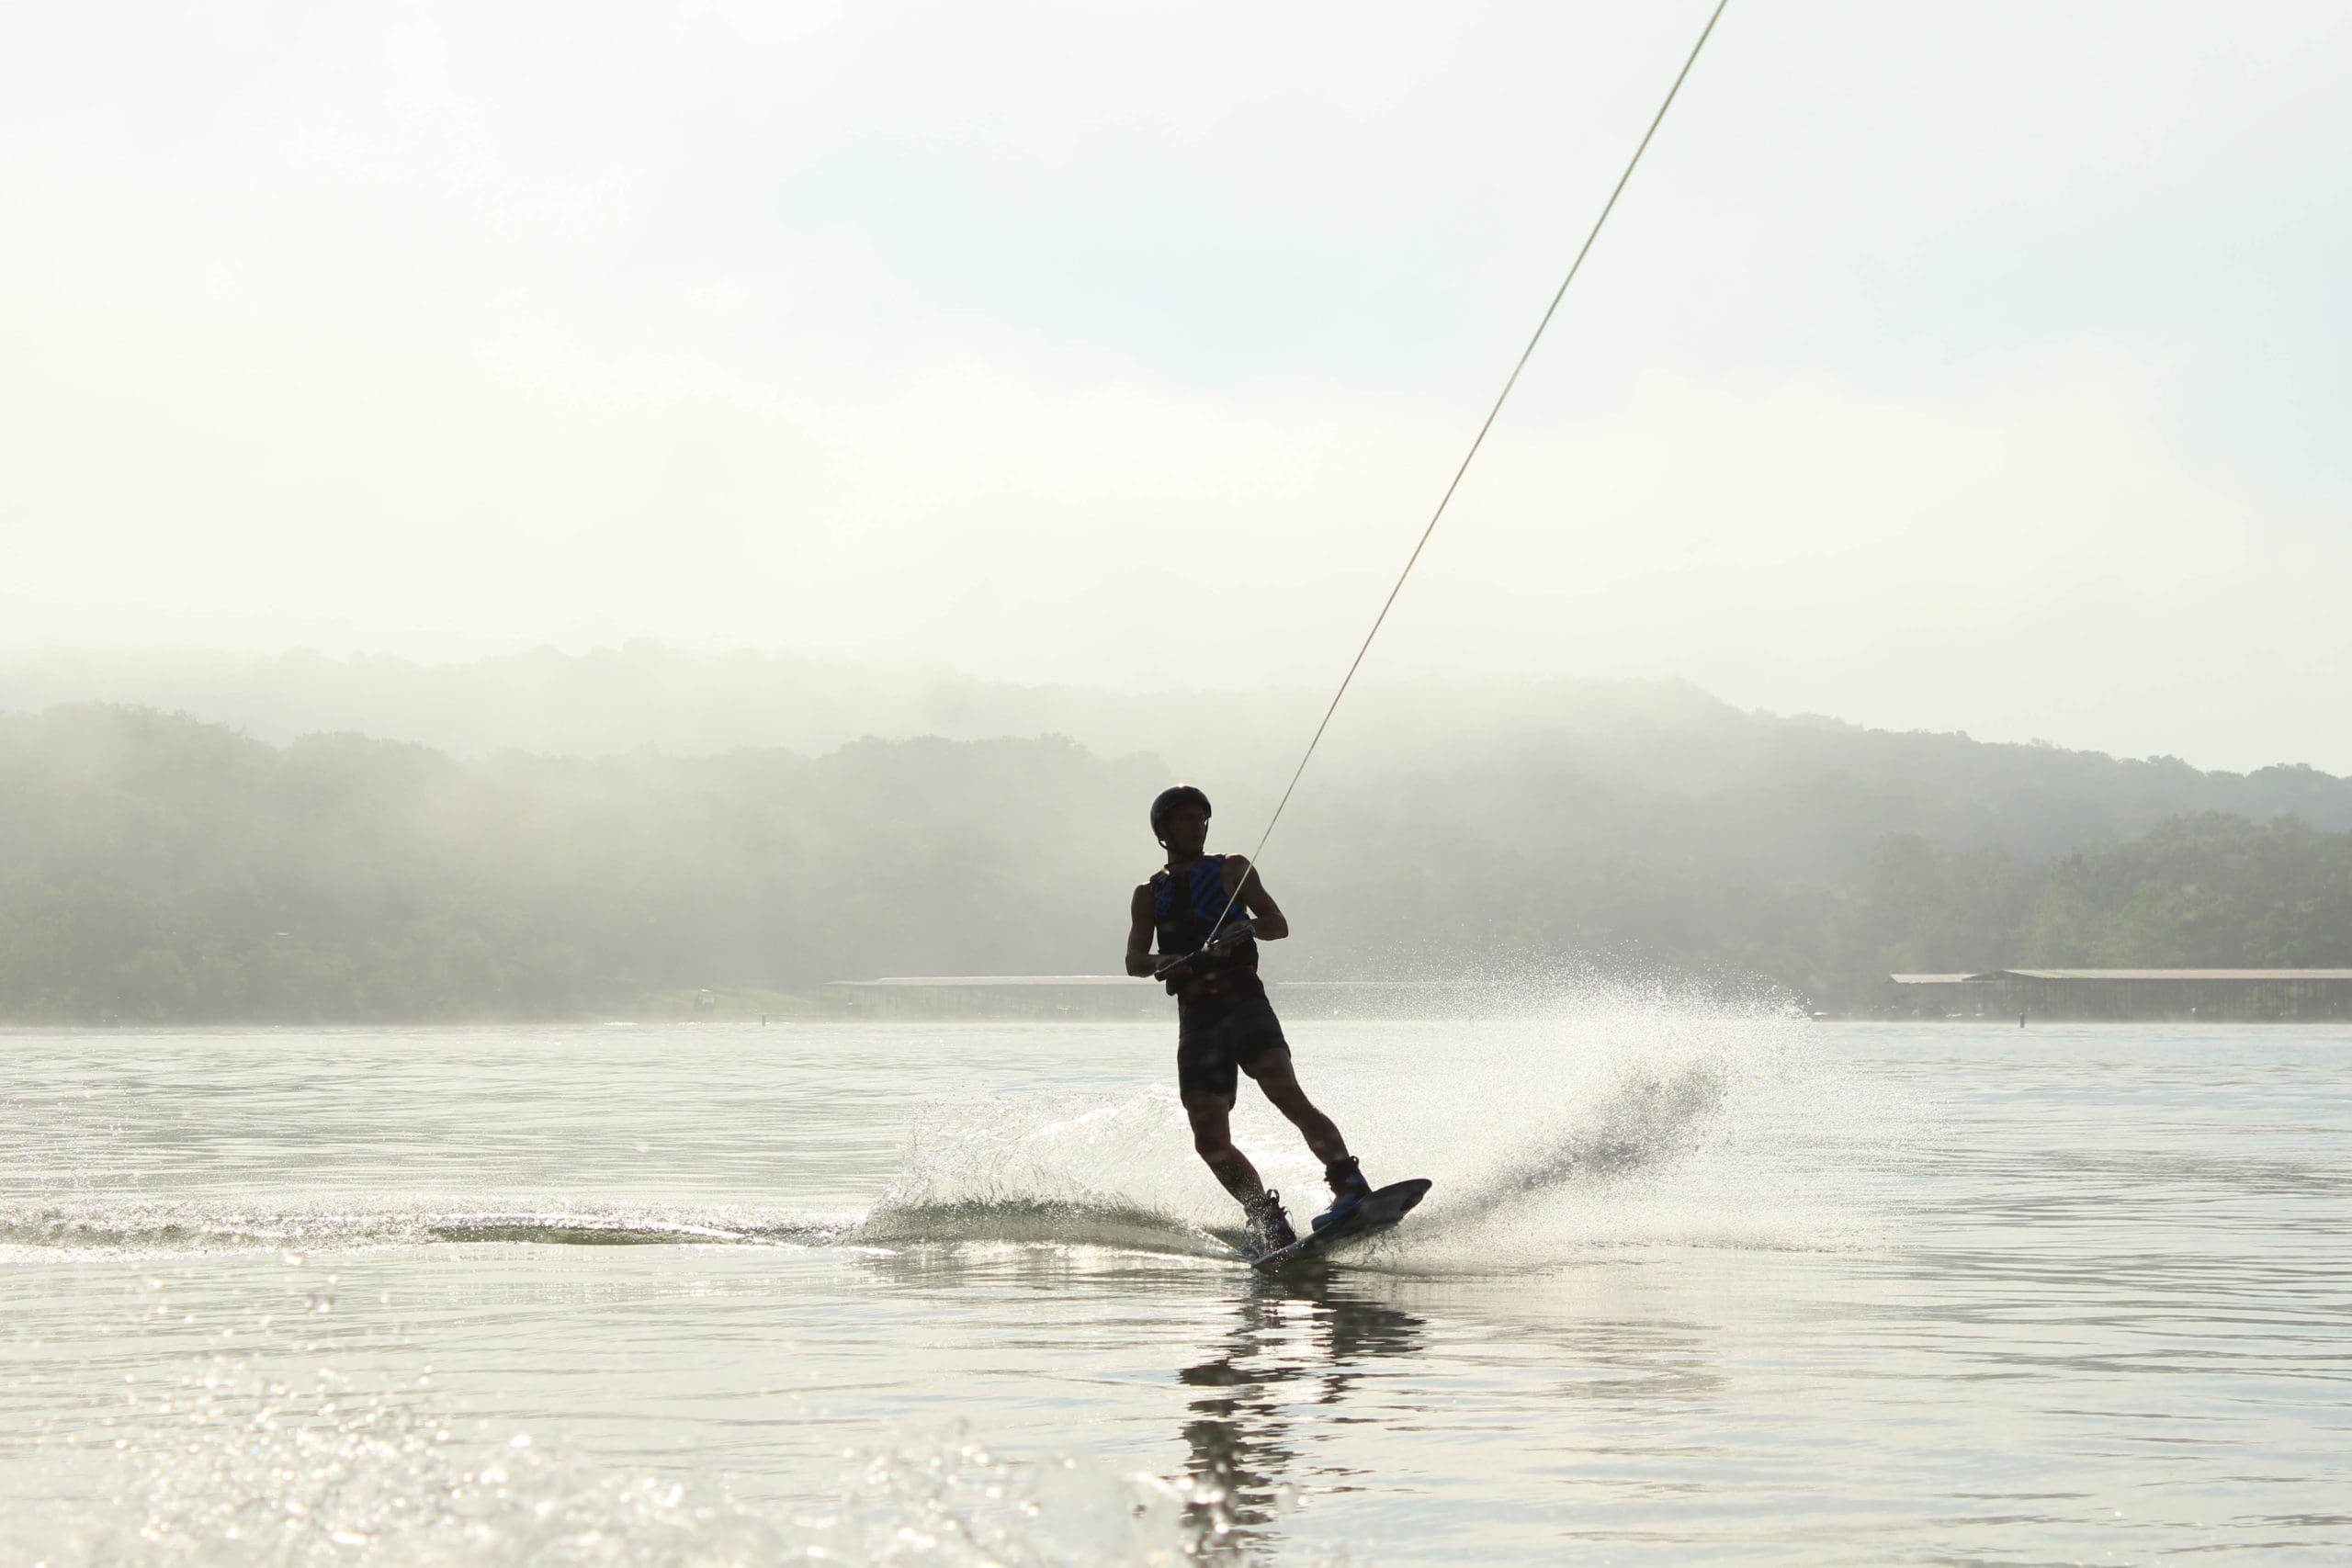 A man wakeboarding on water.